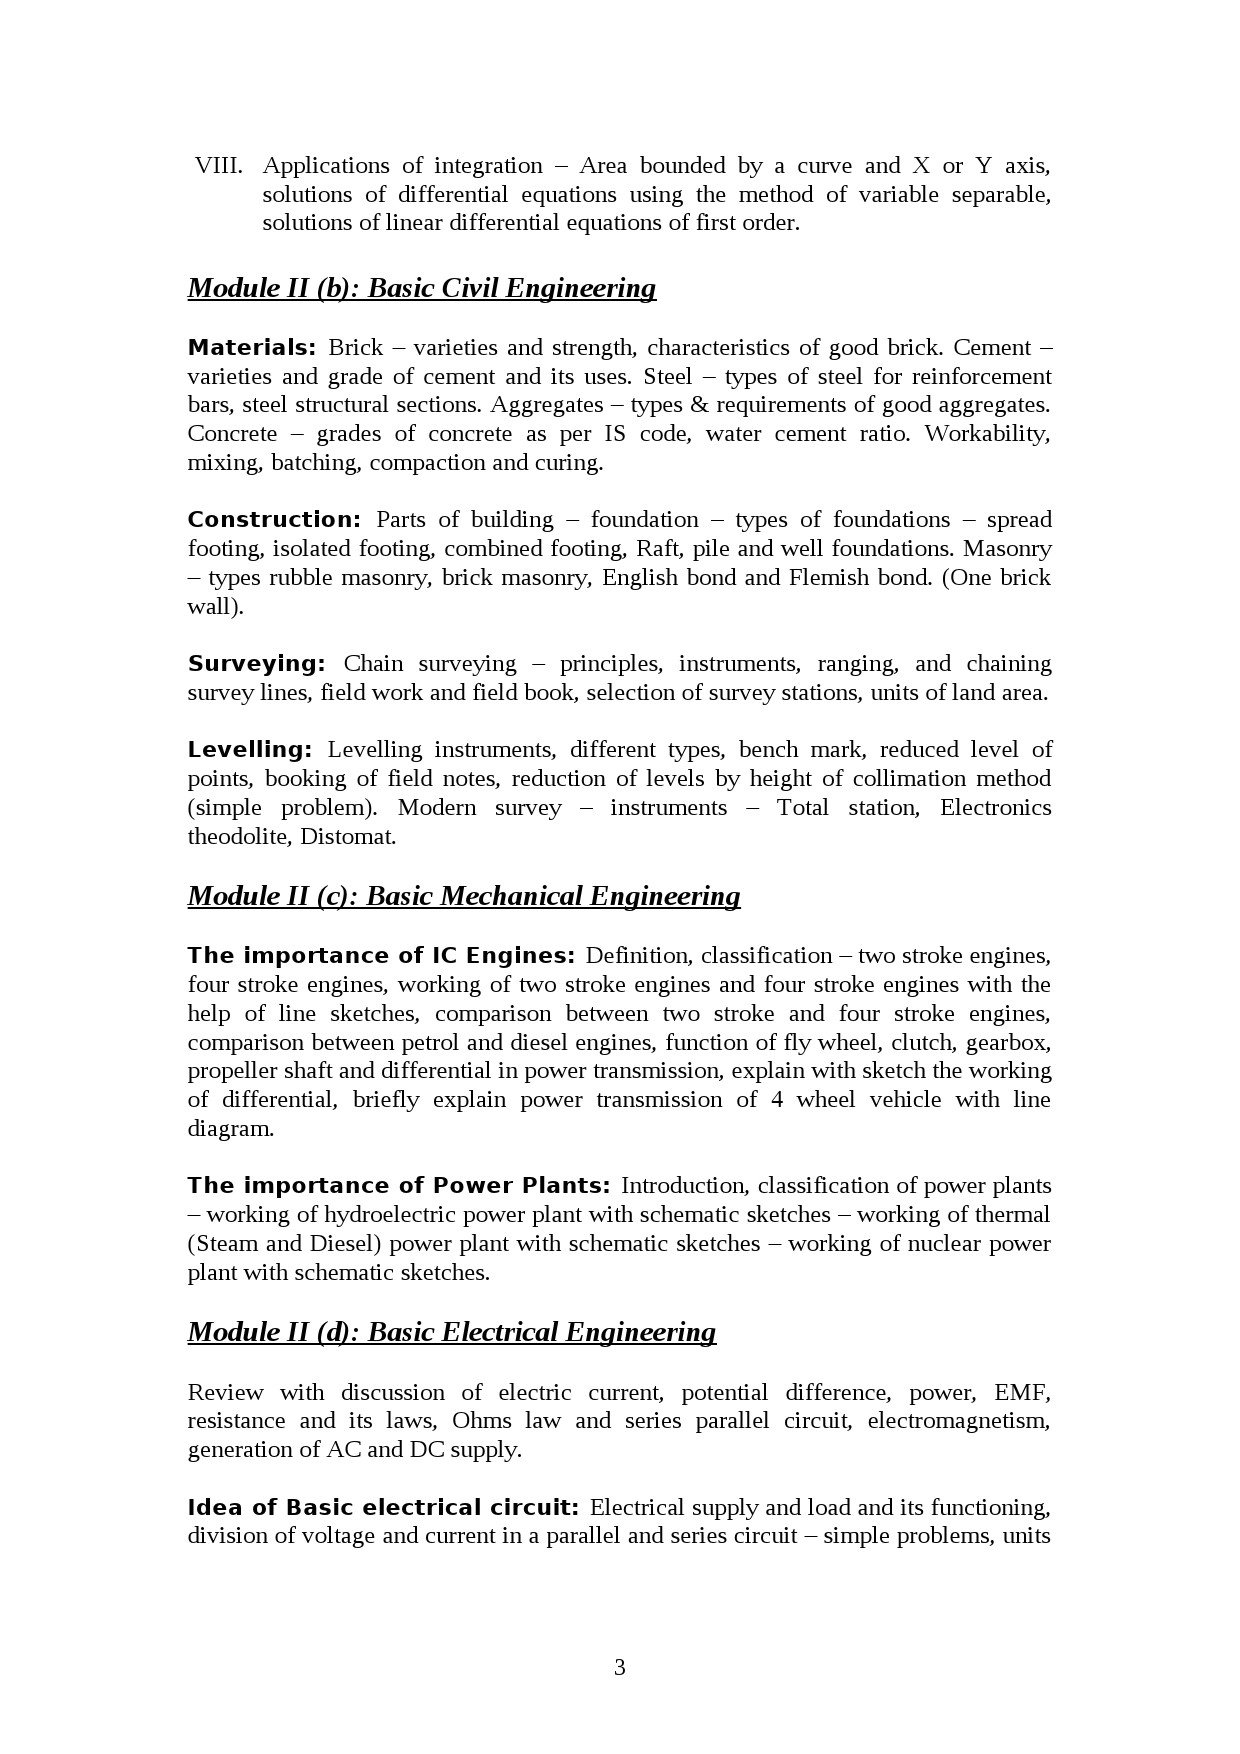 Tool And Die Engineering Lecturer in Polytechnic Exam Syllabus - Notification Image 3